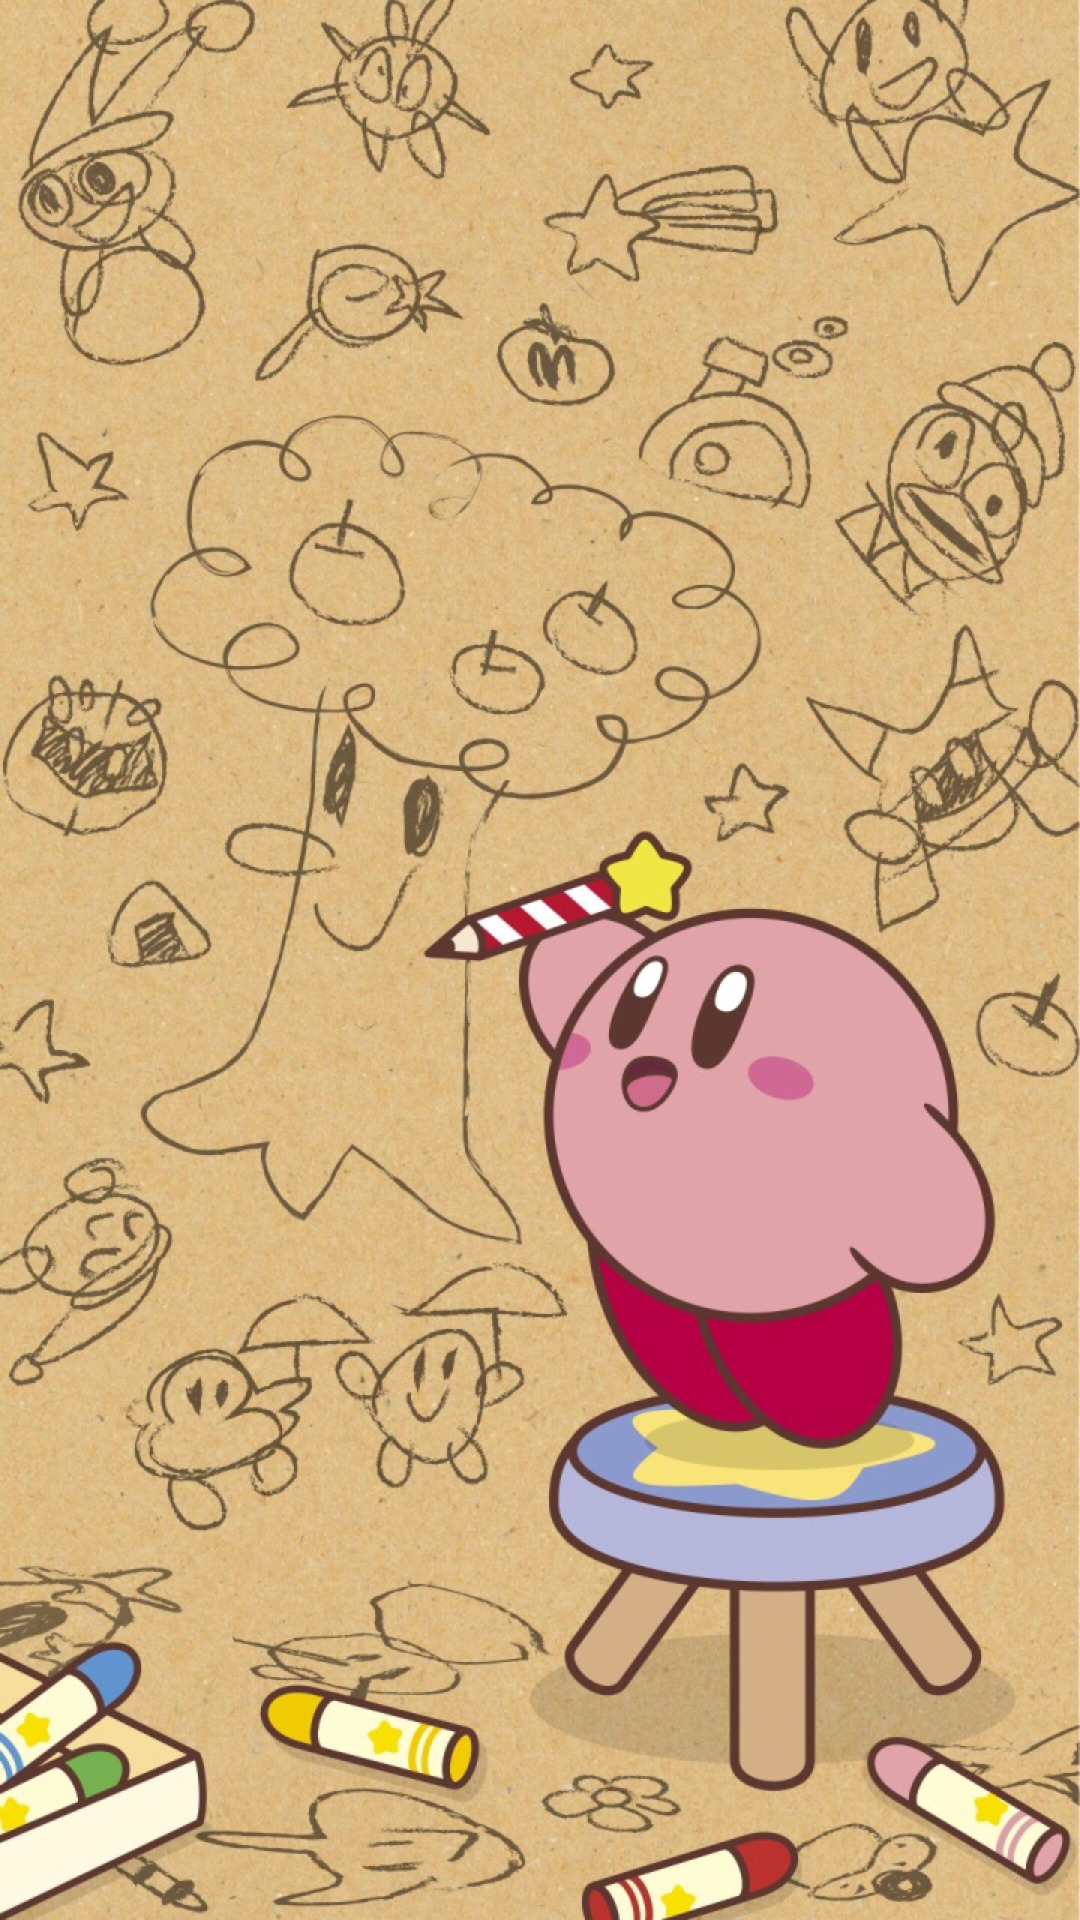 Wallpaper ID 443987  Video Game Kirby Phone Wallpaper  750x1334 free  download